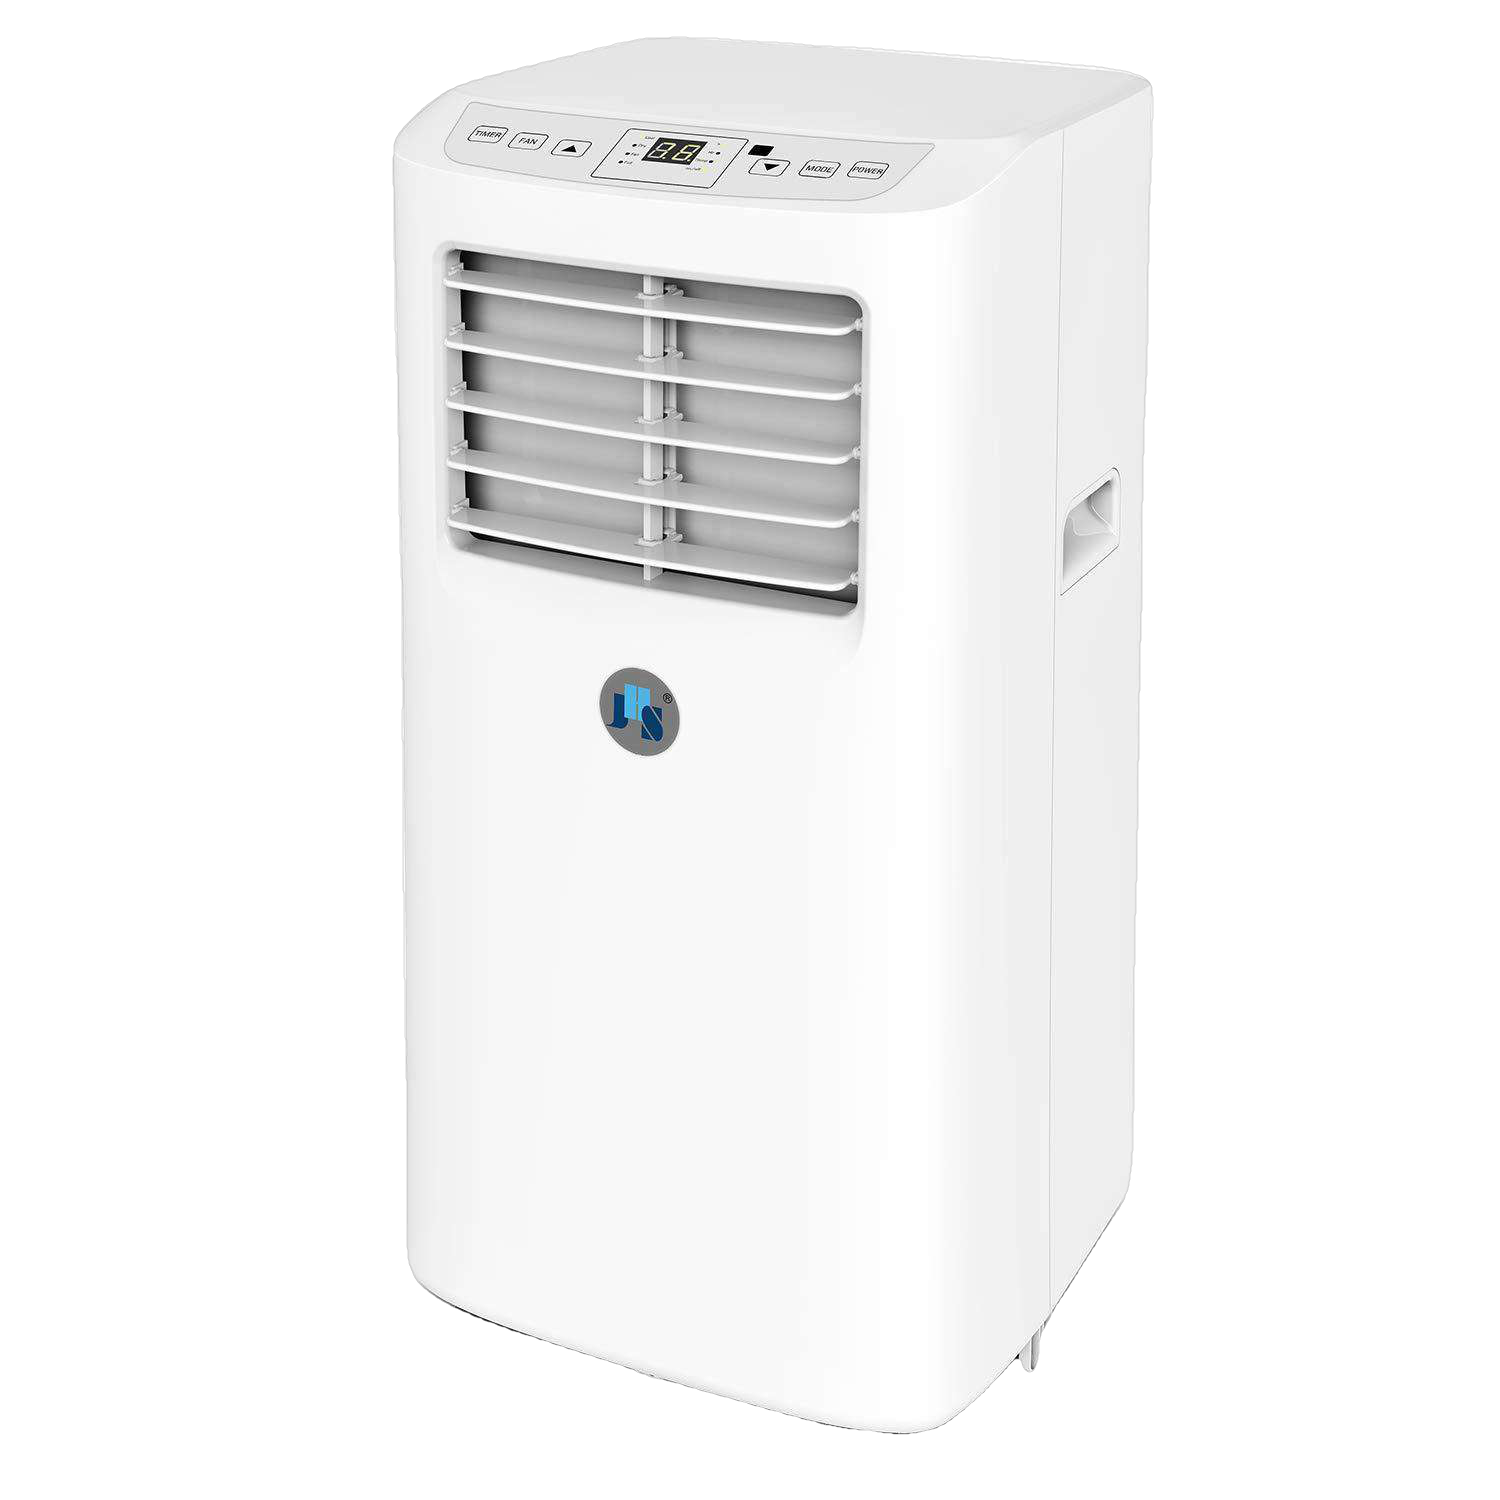 JHS, JHS A019-8KR/A 8,000 BTU Portable Air Conditioner with Dehumidifier and Remote New